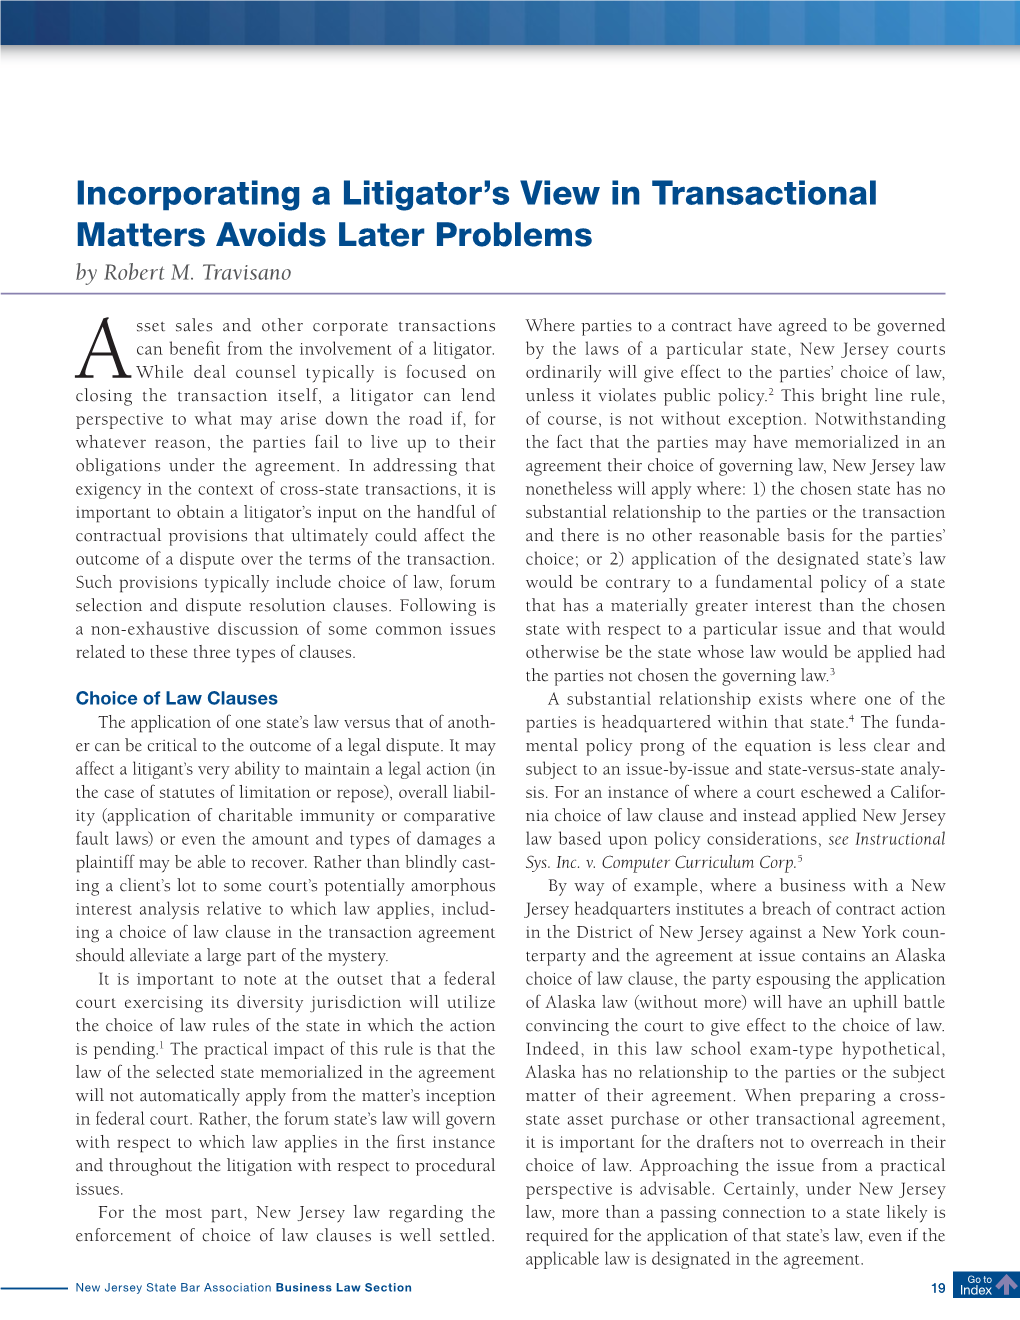 Incorporating a Litigator's View in Transactional Matters Avoids Later Problems